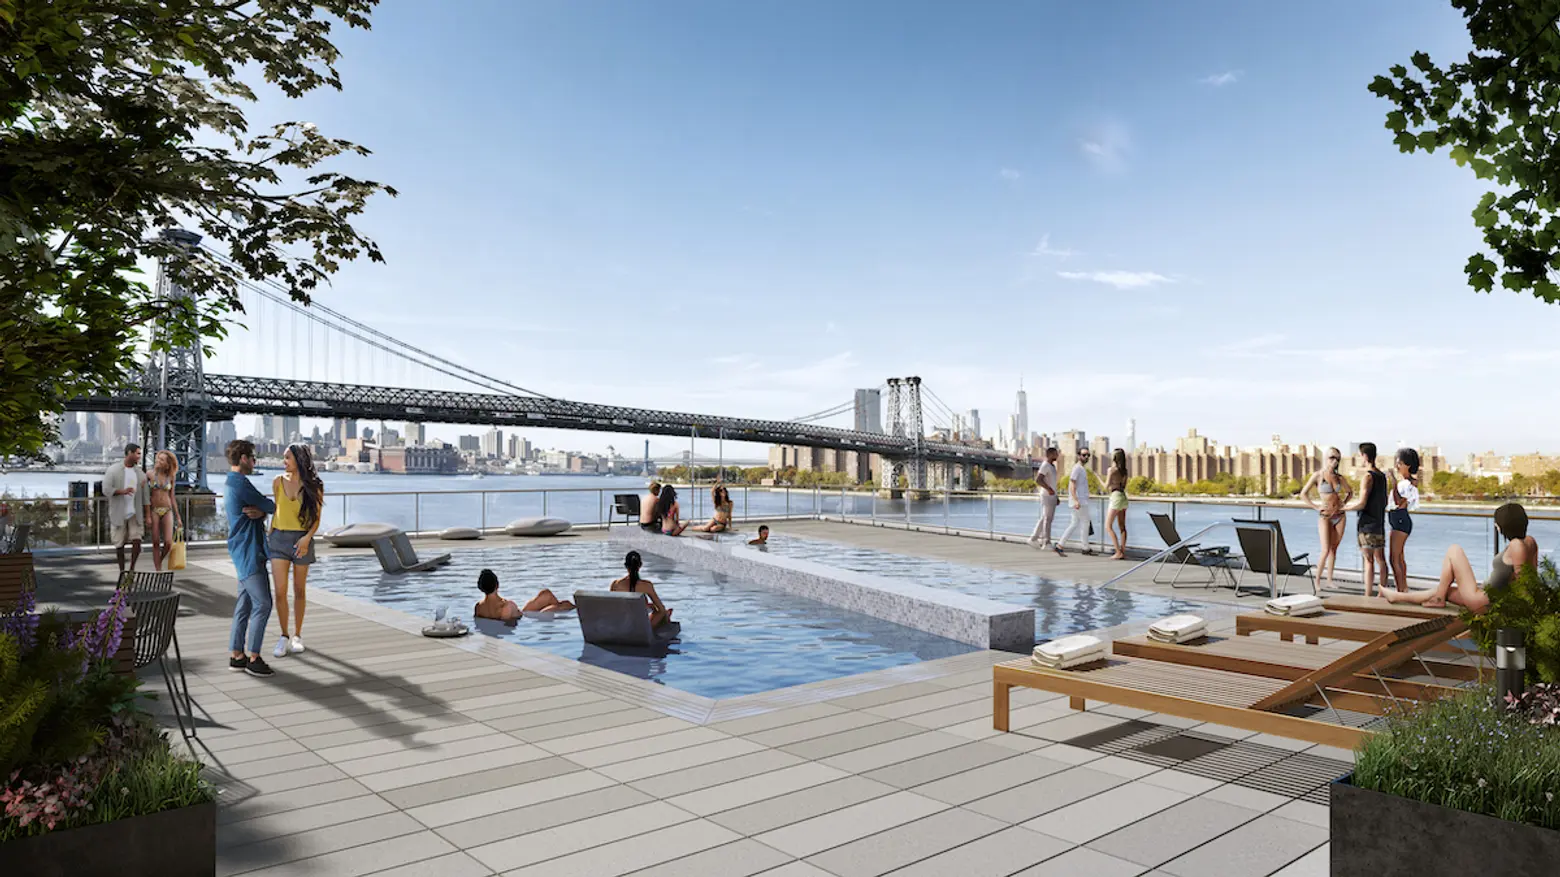 Williamsburg’s tallest building opens in Domino complex with an outdoor pool and rooftop cabanas